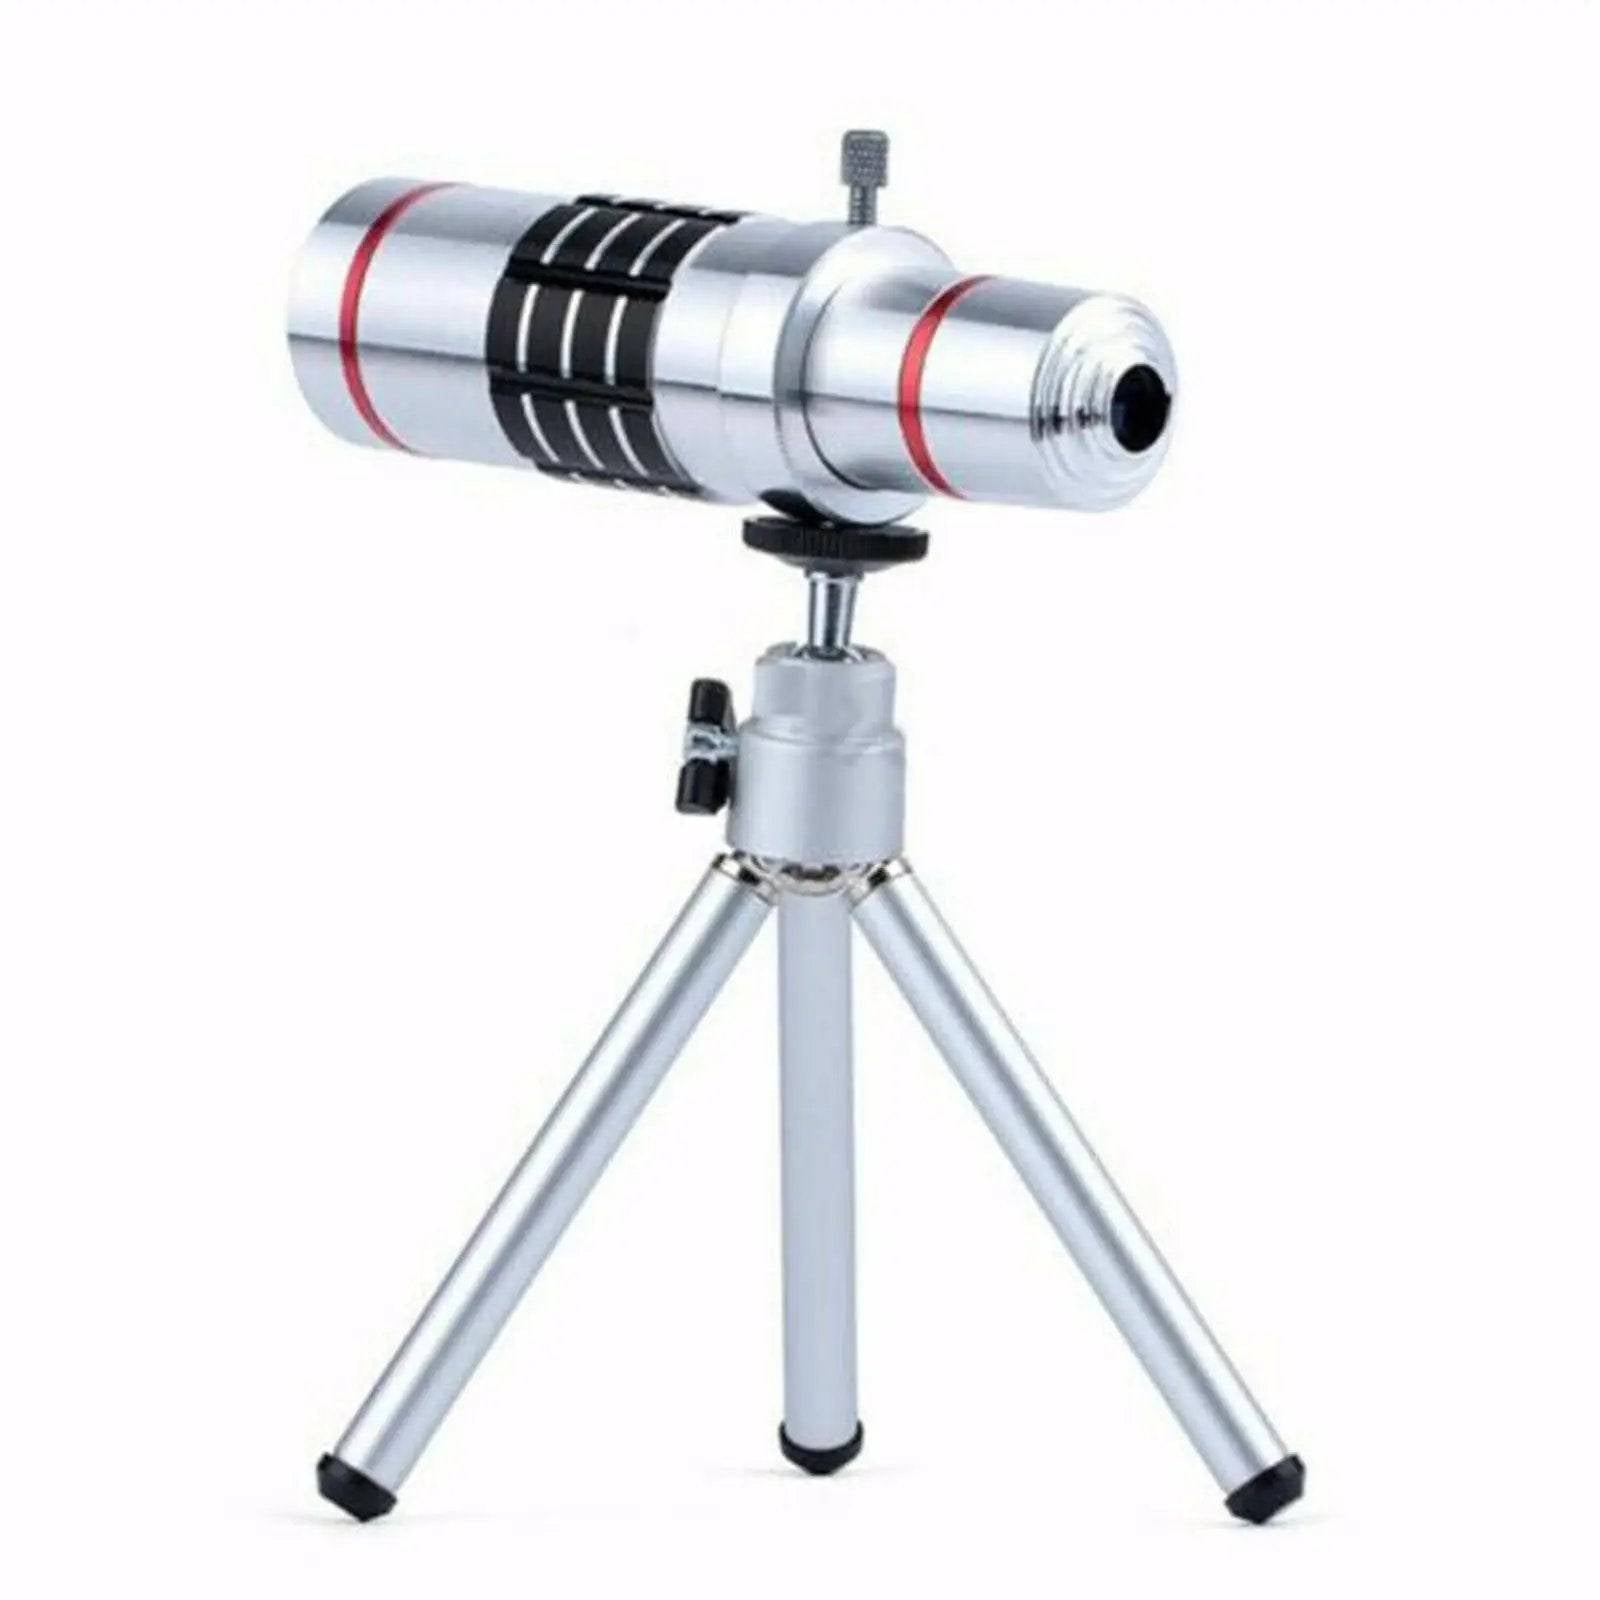 18X Zoom HD Monocular Telescope With Tripod Stand Kit For Cell Phone MLNshops